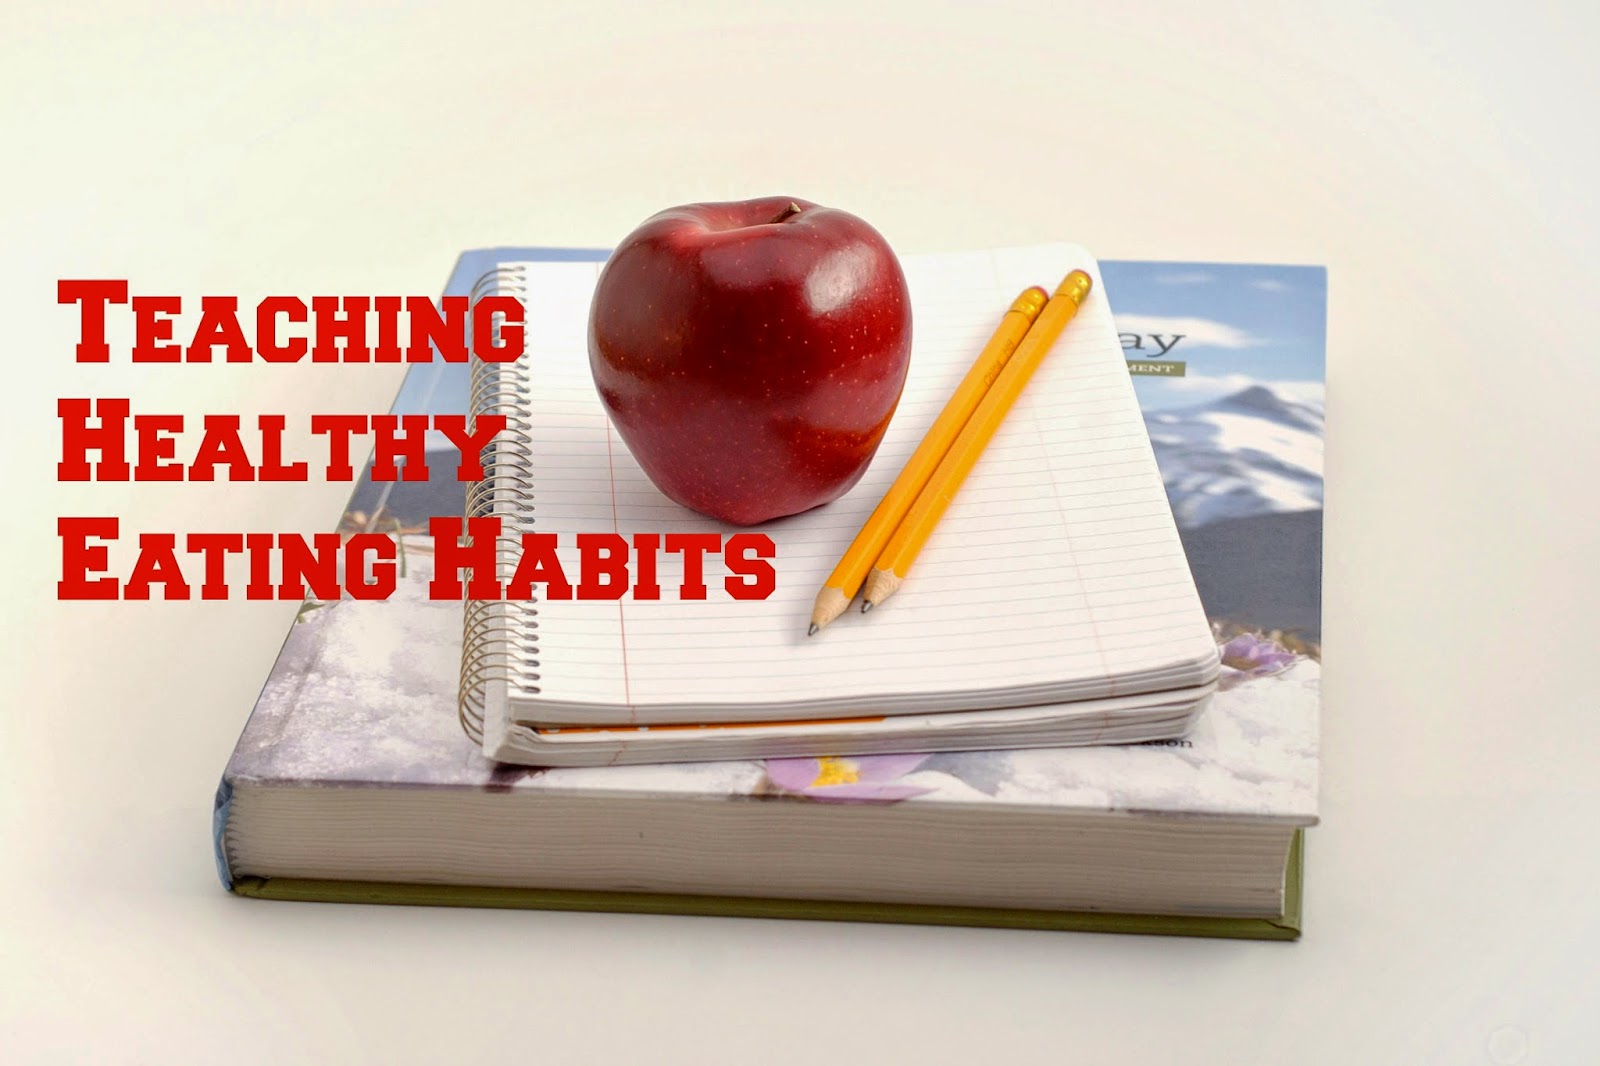 5 Tips To Develop Healthy Eating Habits In Your Kids + 1 Bonus Tip